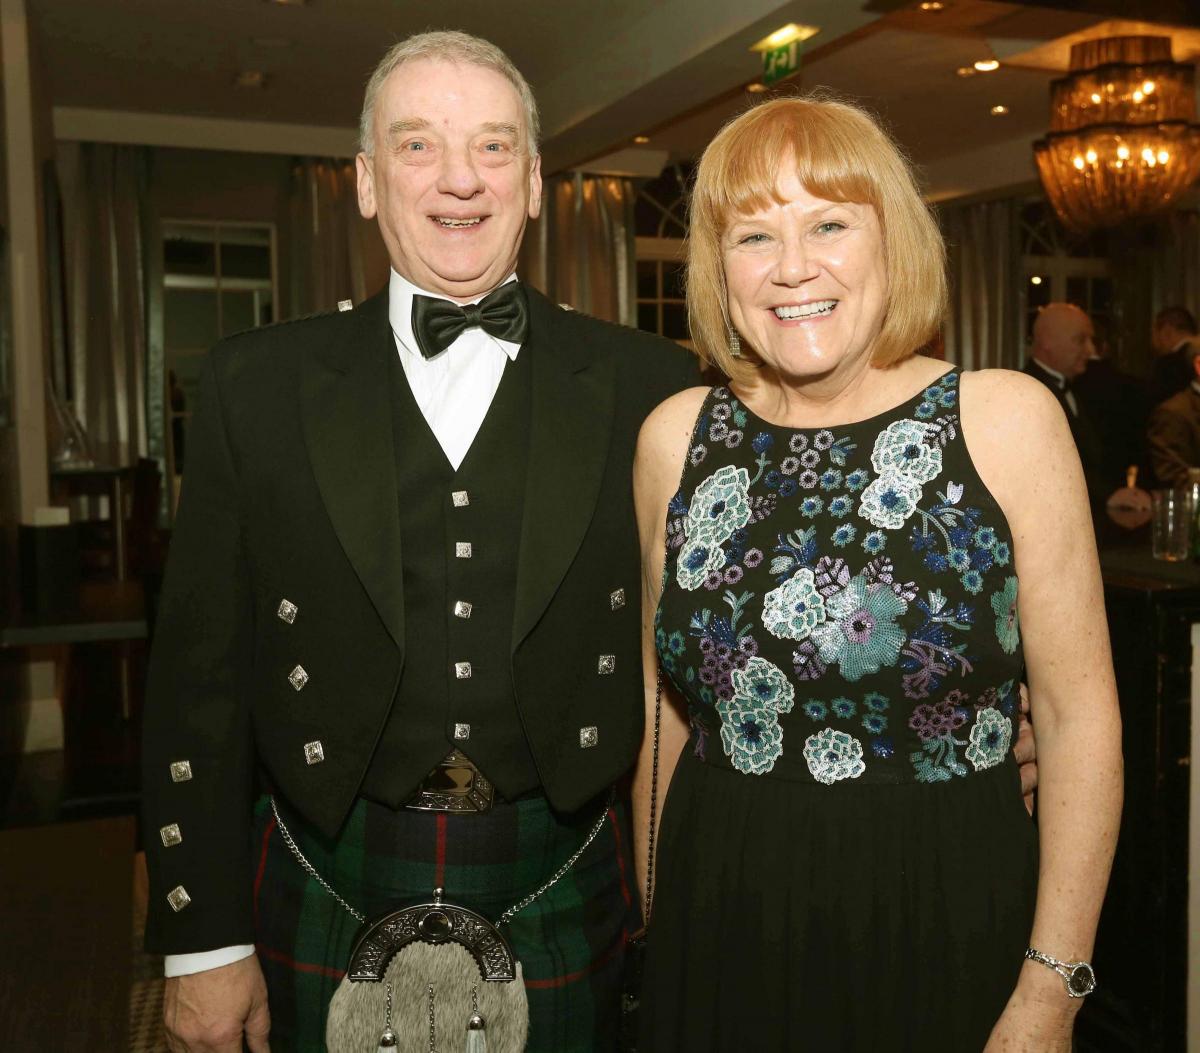 The Masonic Ladies Night at Scotch Corner Hotel.
Trevor and Maureen James.
Picture: Richard Doughty Photography